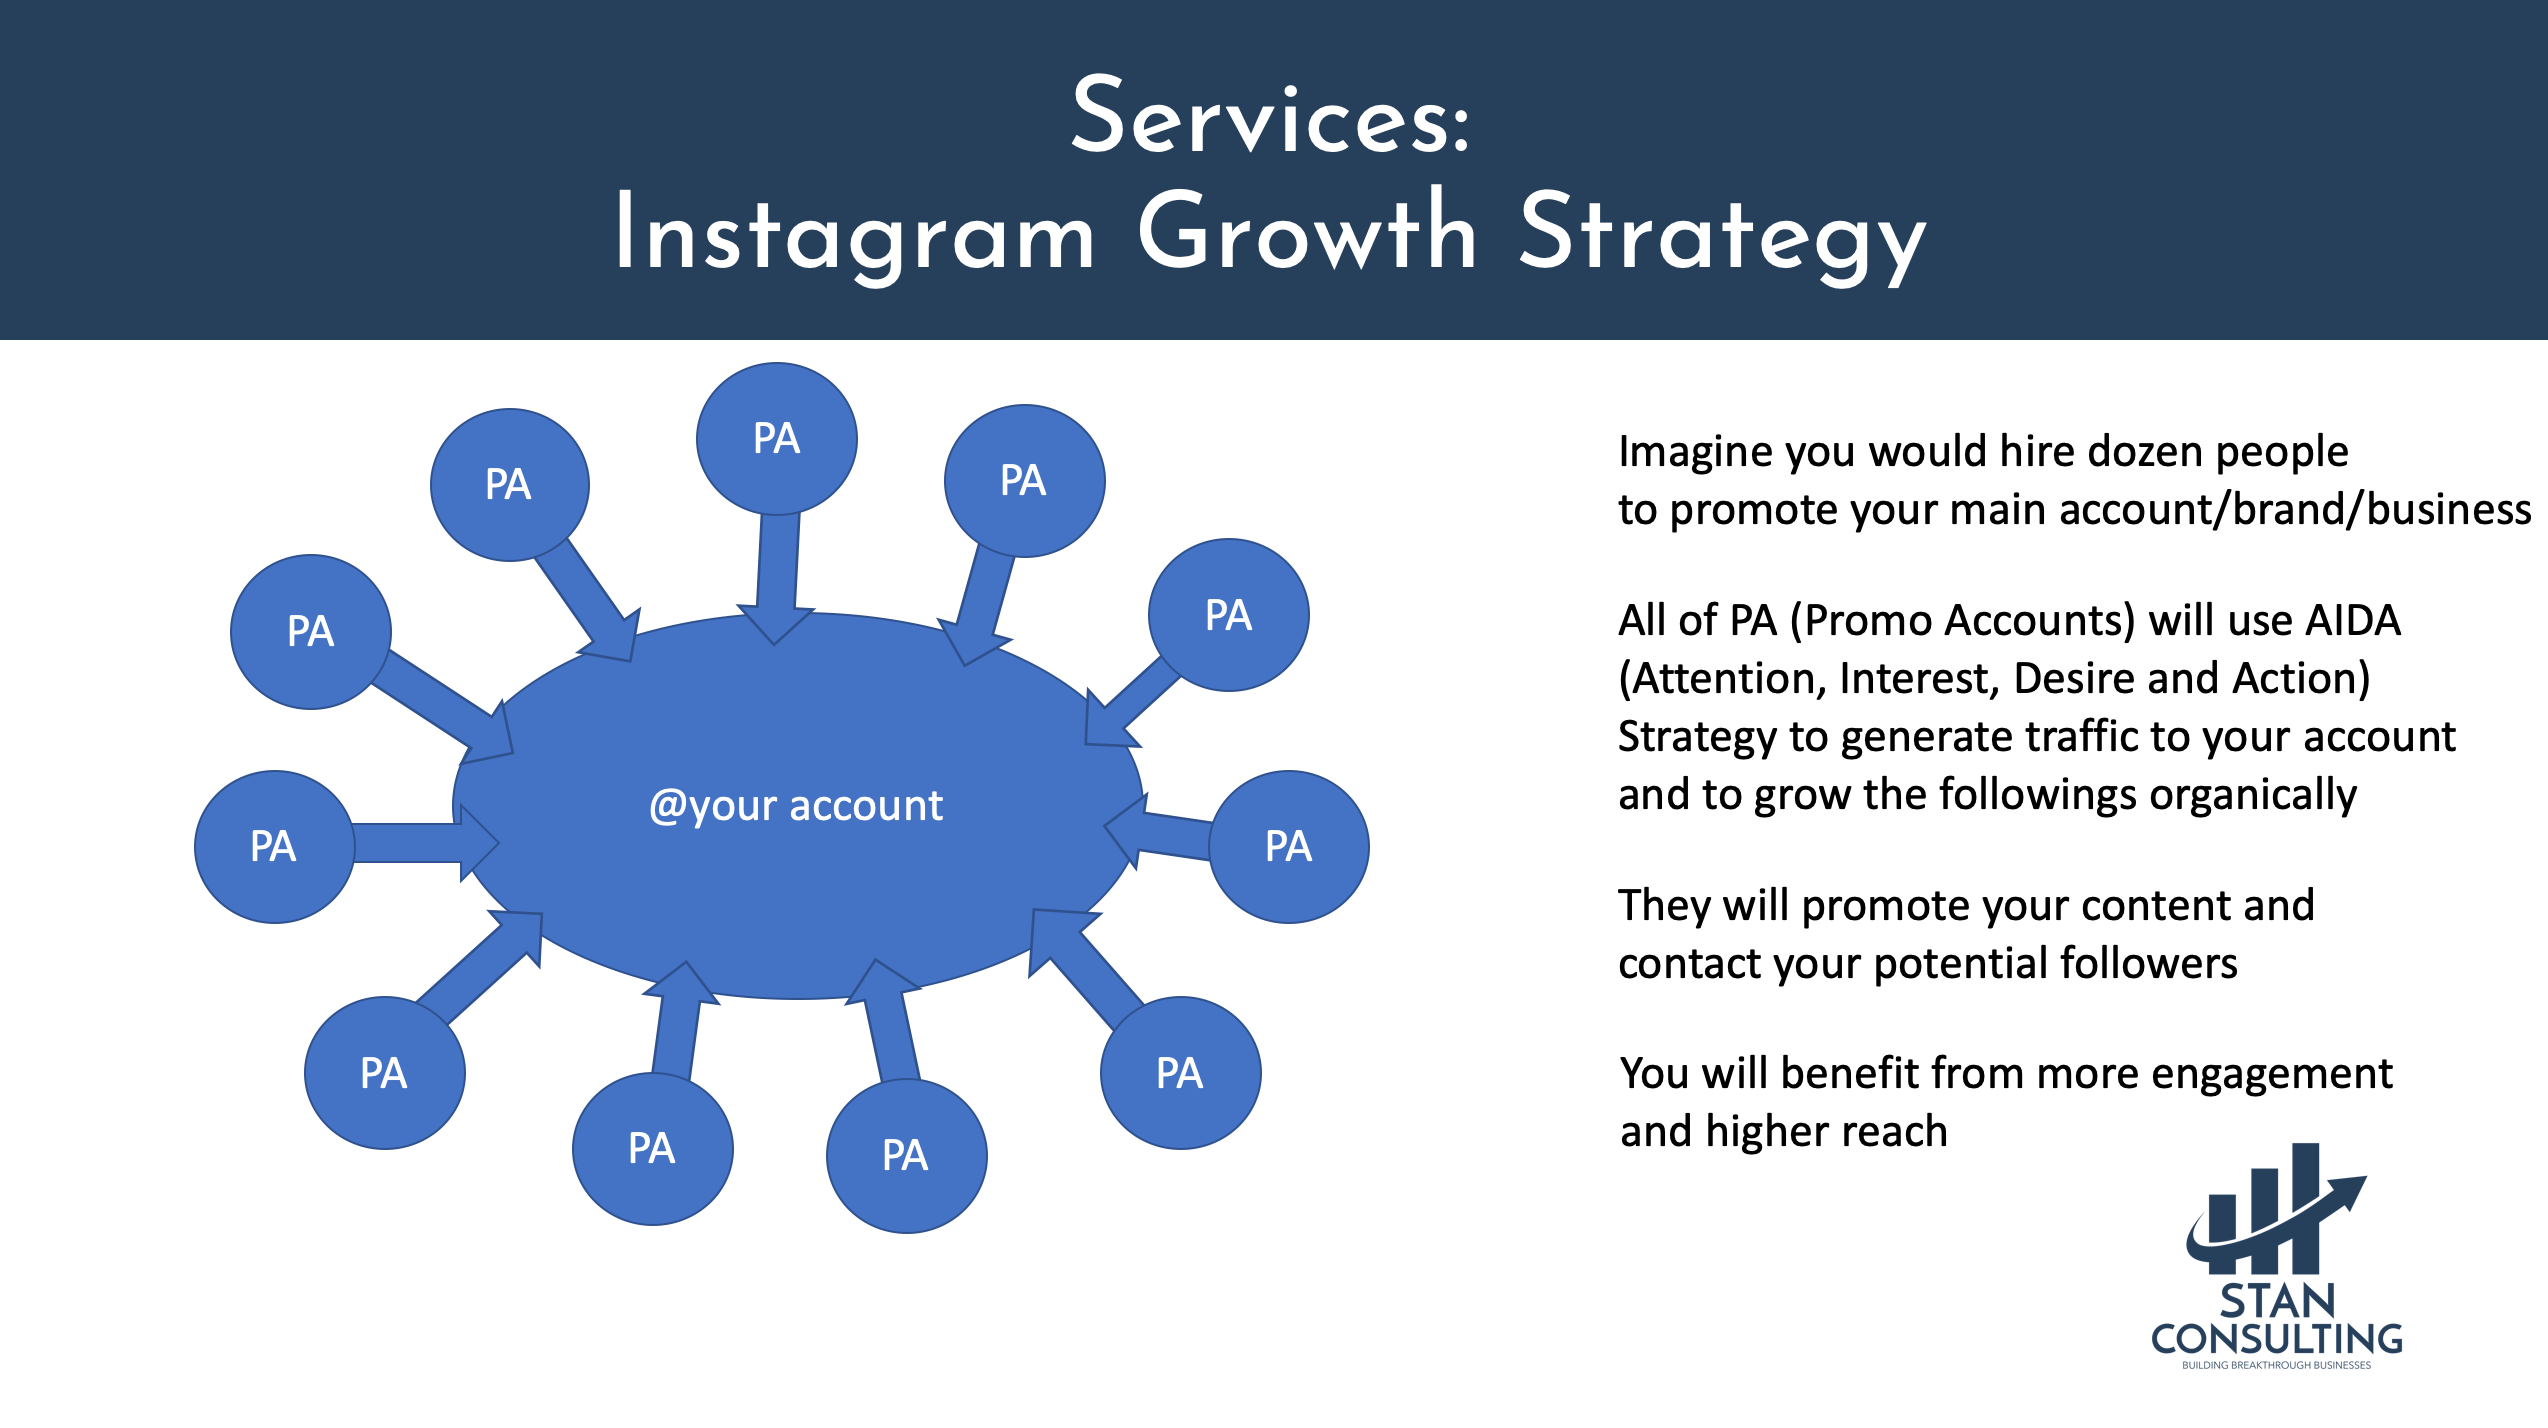 Instagram growth services by stan consulting www.stanconsultingllc.com how to get 10k followers fast